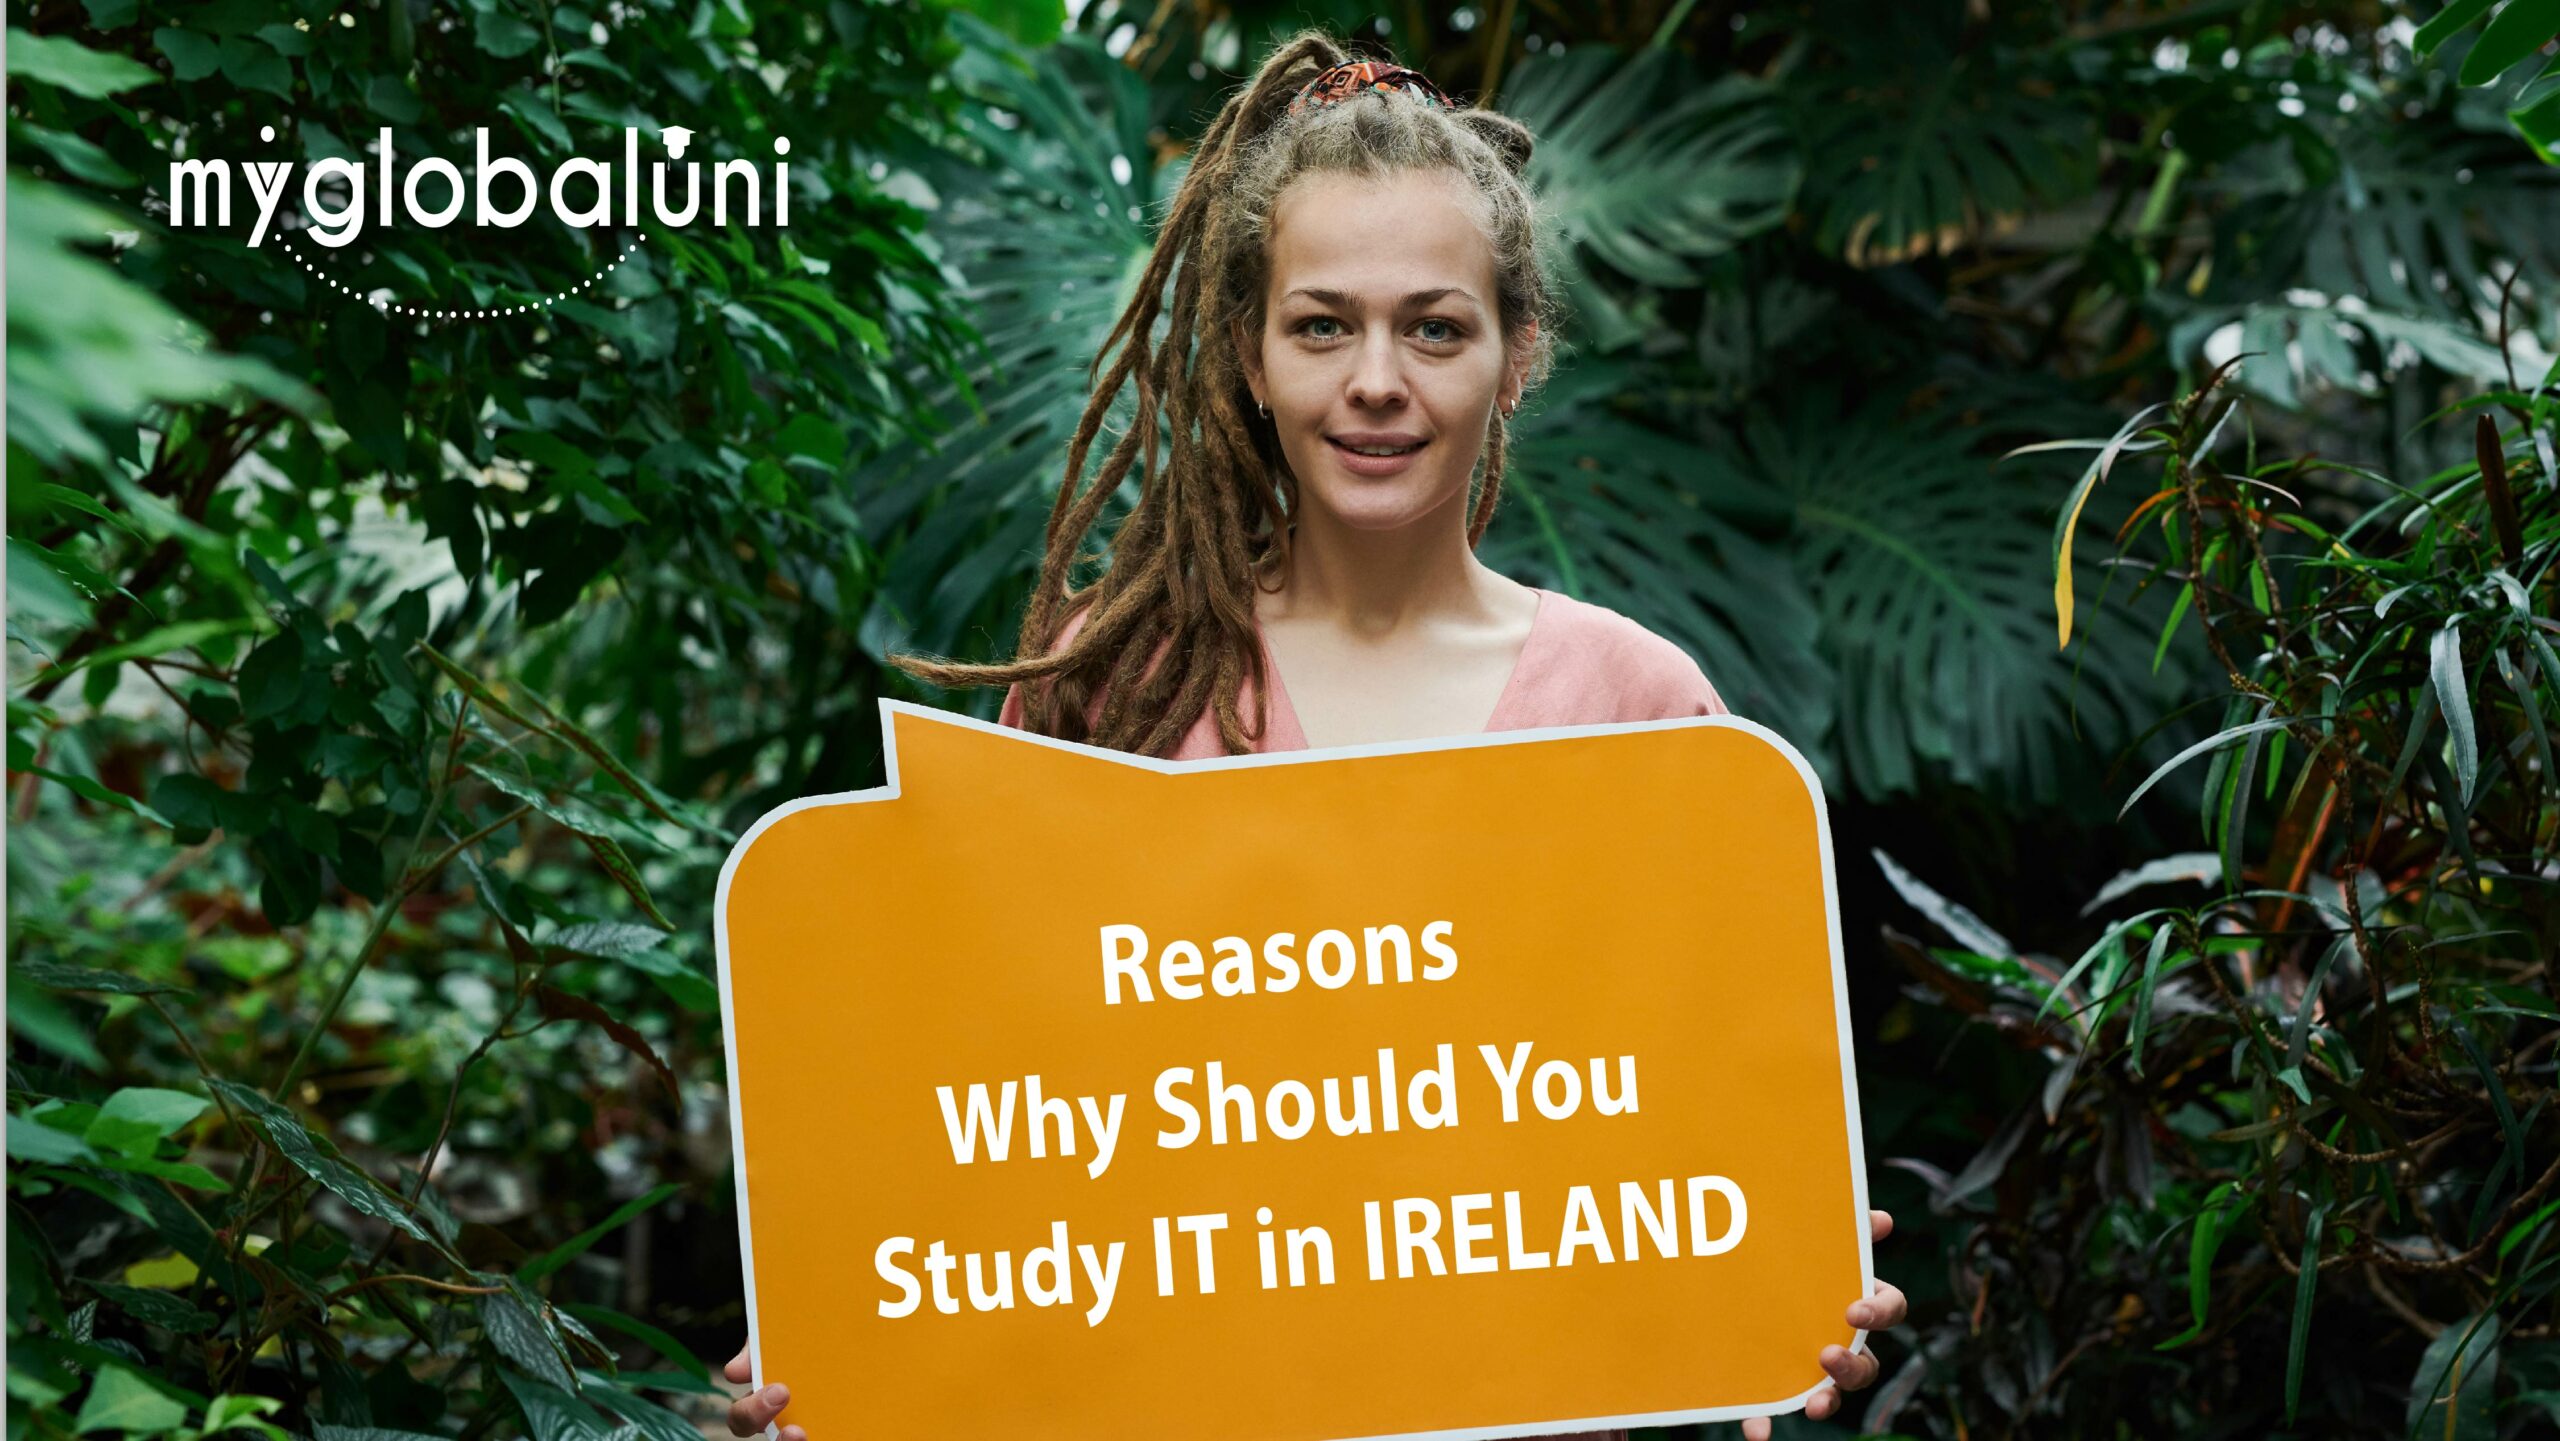 Reasons why should you study IT in Ireland